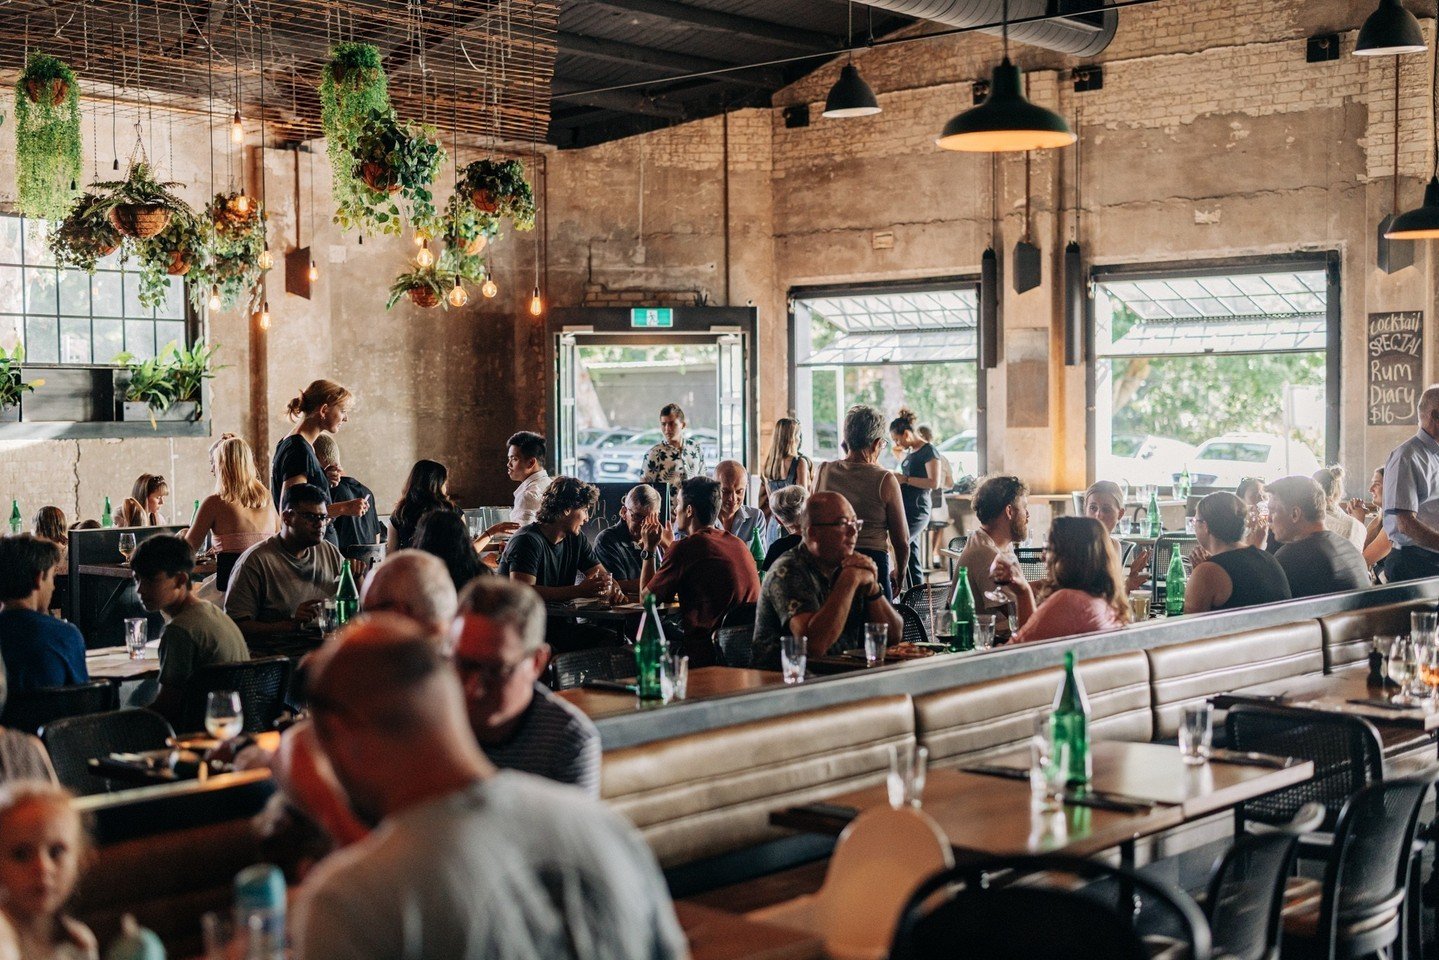 Do you have a special event coming up? Ask us about holding your function at Parry St Garage! ⁠
⁠
We offer packages for weddings, birthdays, corporate gatherings, engagement parties, you name it 🍻🙌 Visit our website to enquire today! #parrystgarage